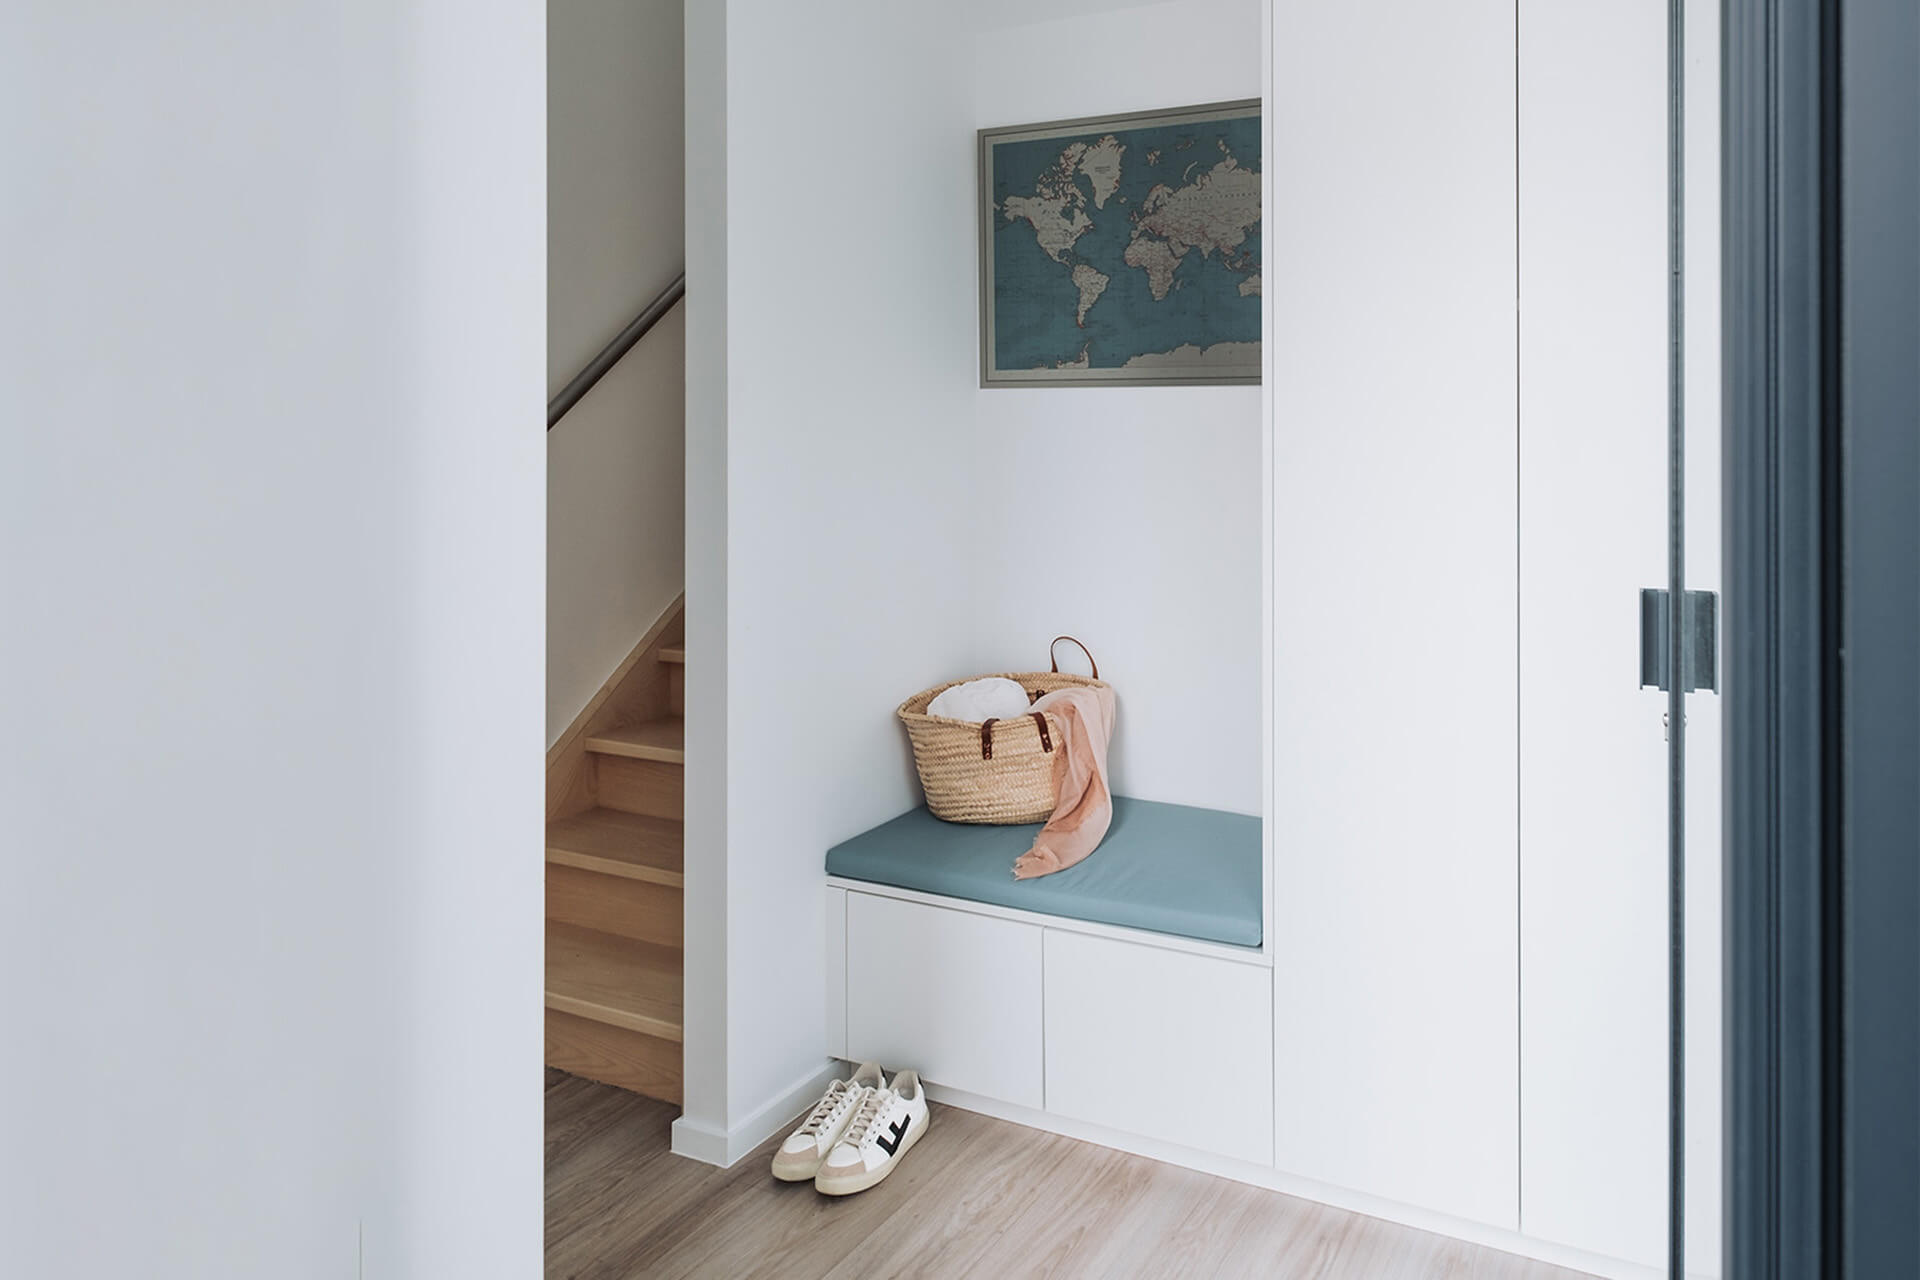 Custom-made wardrobe with bench in the entrance hall, from maatkastenonline